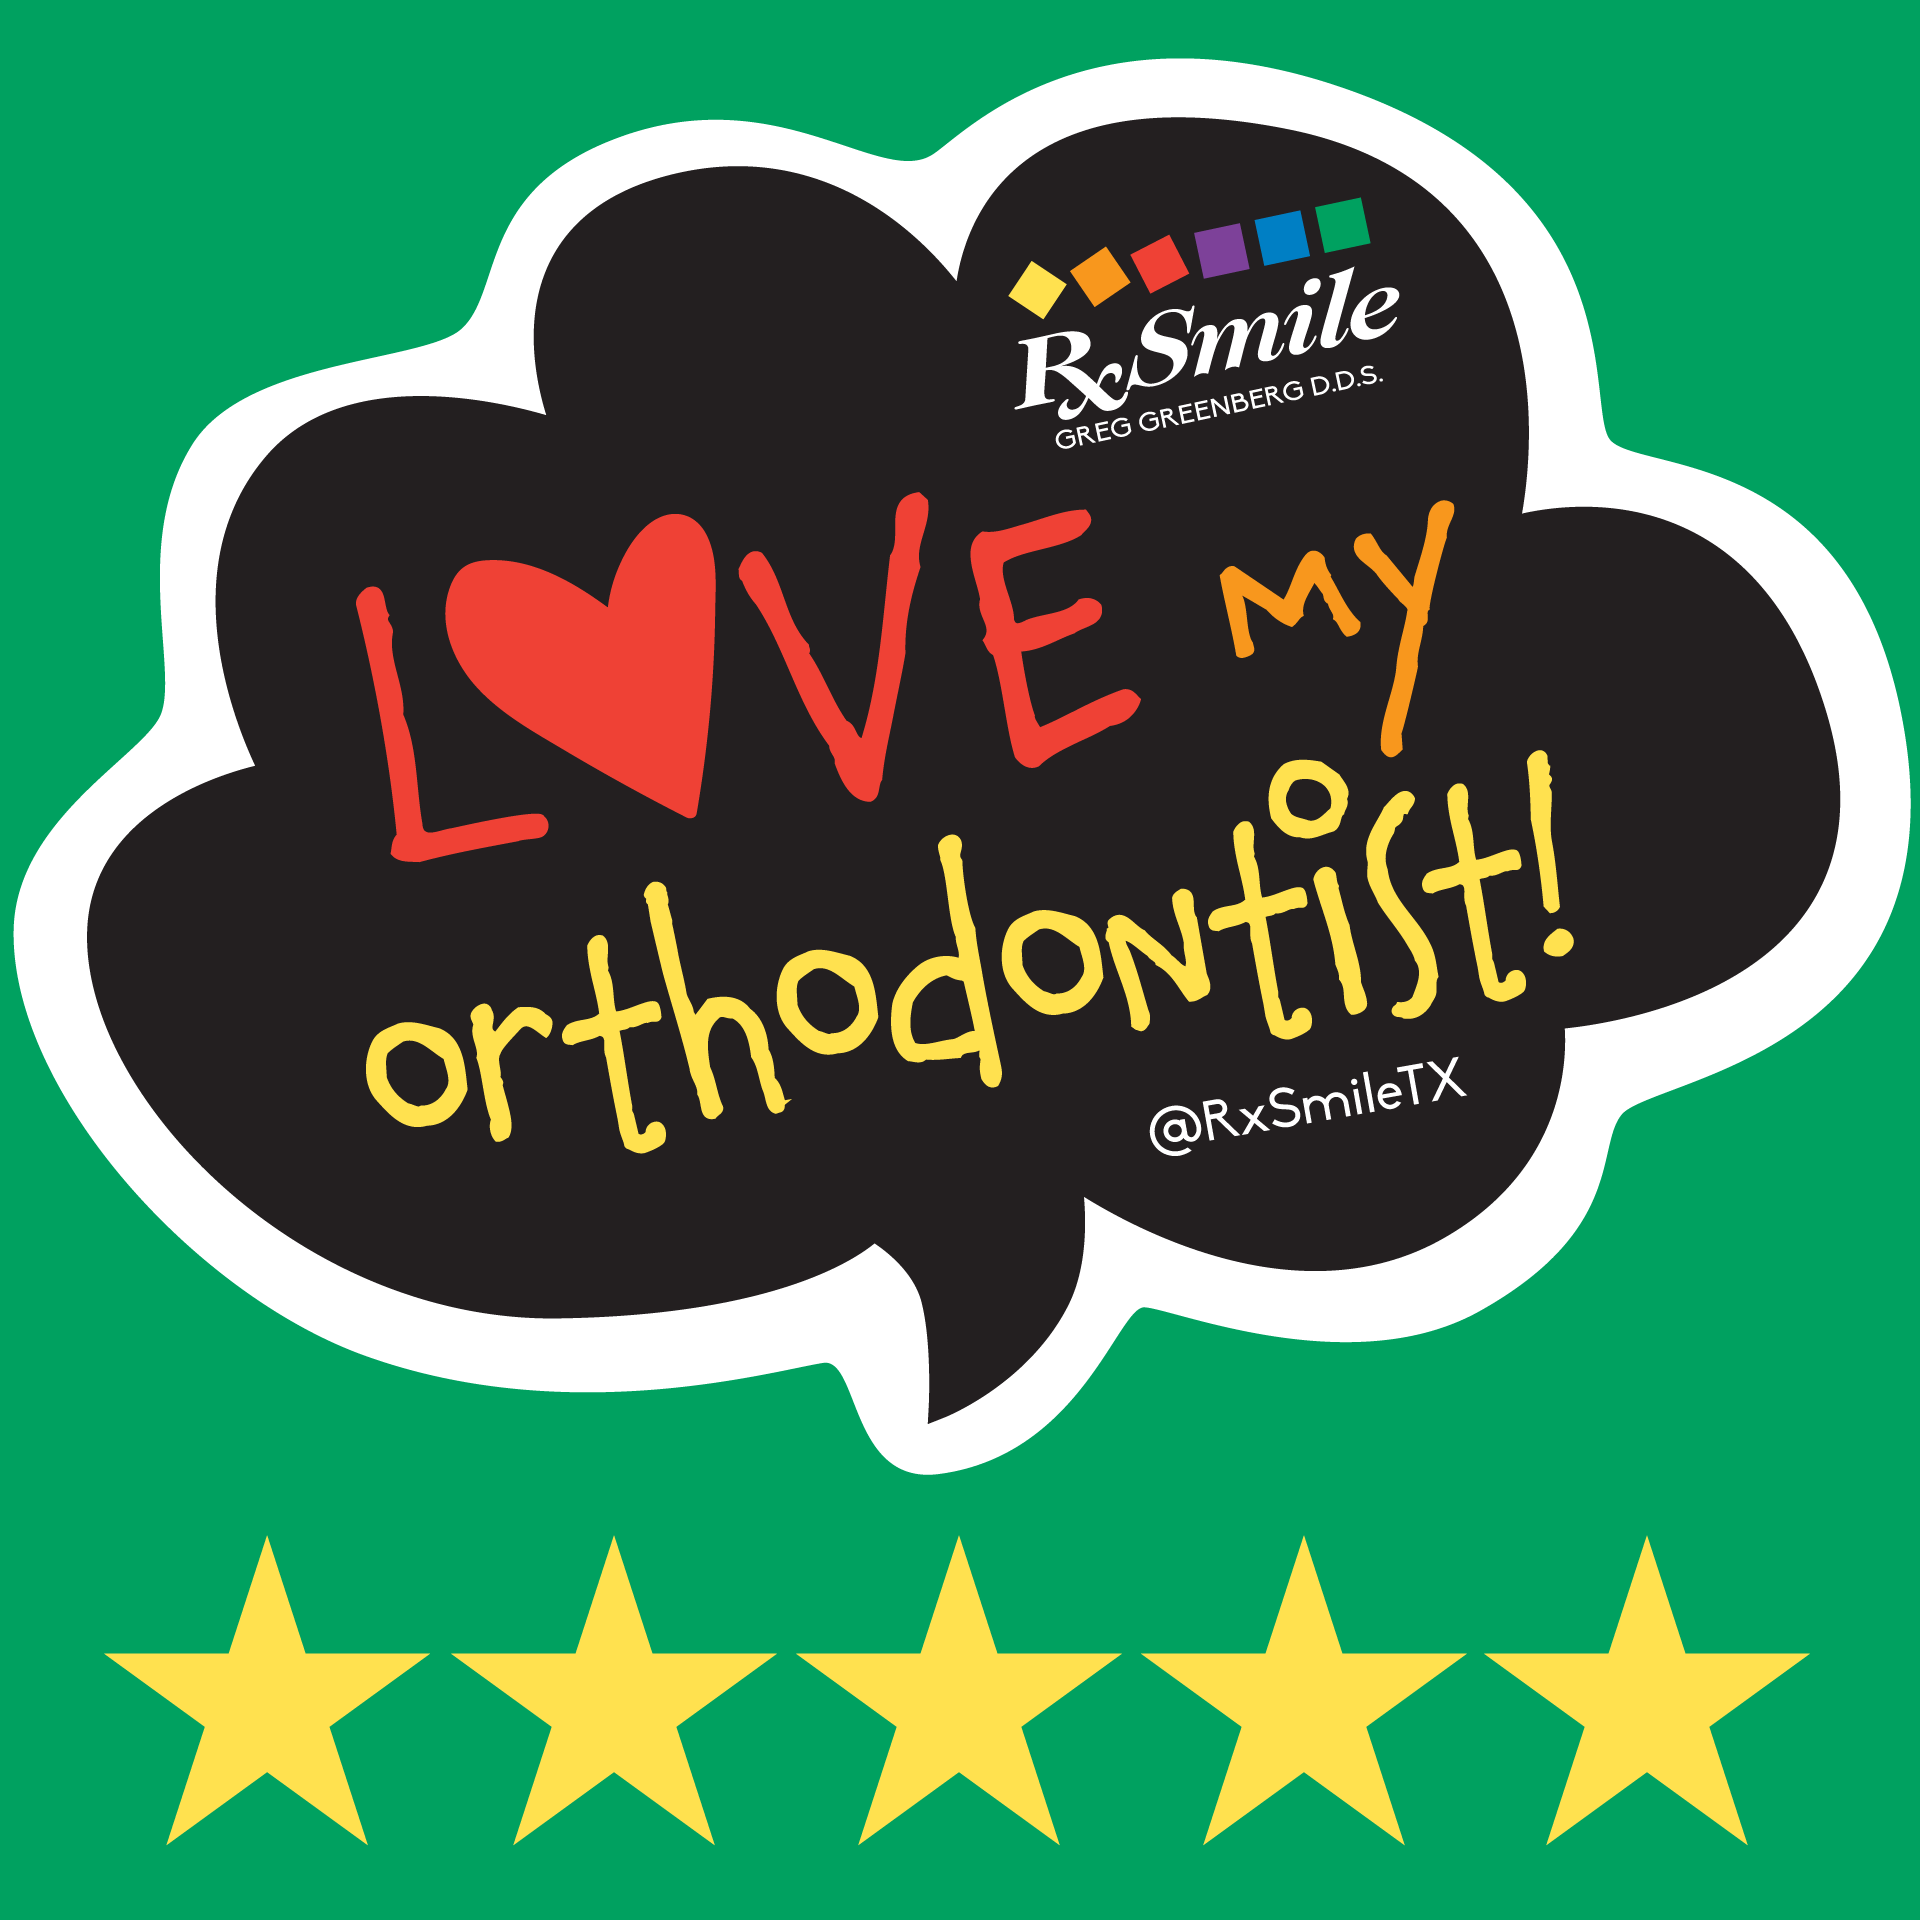 patients tell us why they love RxSmile Orthodontics and Dr. Greenberg